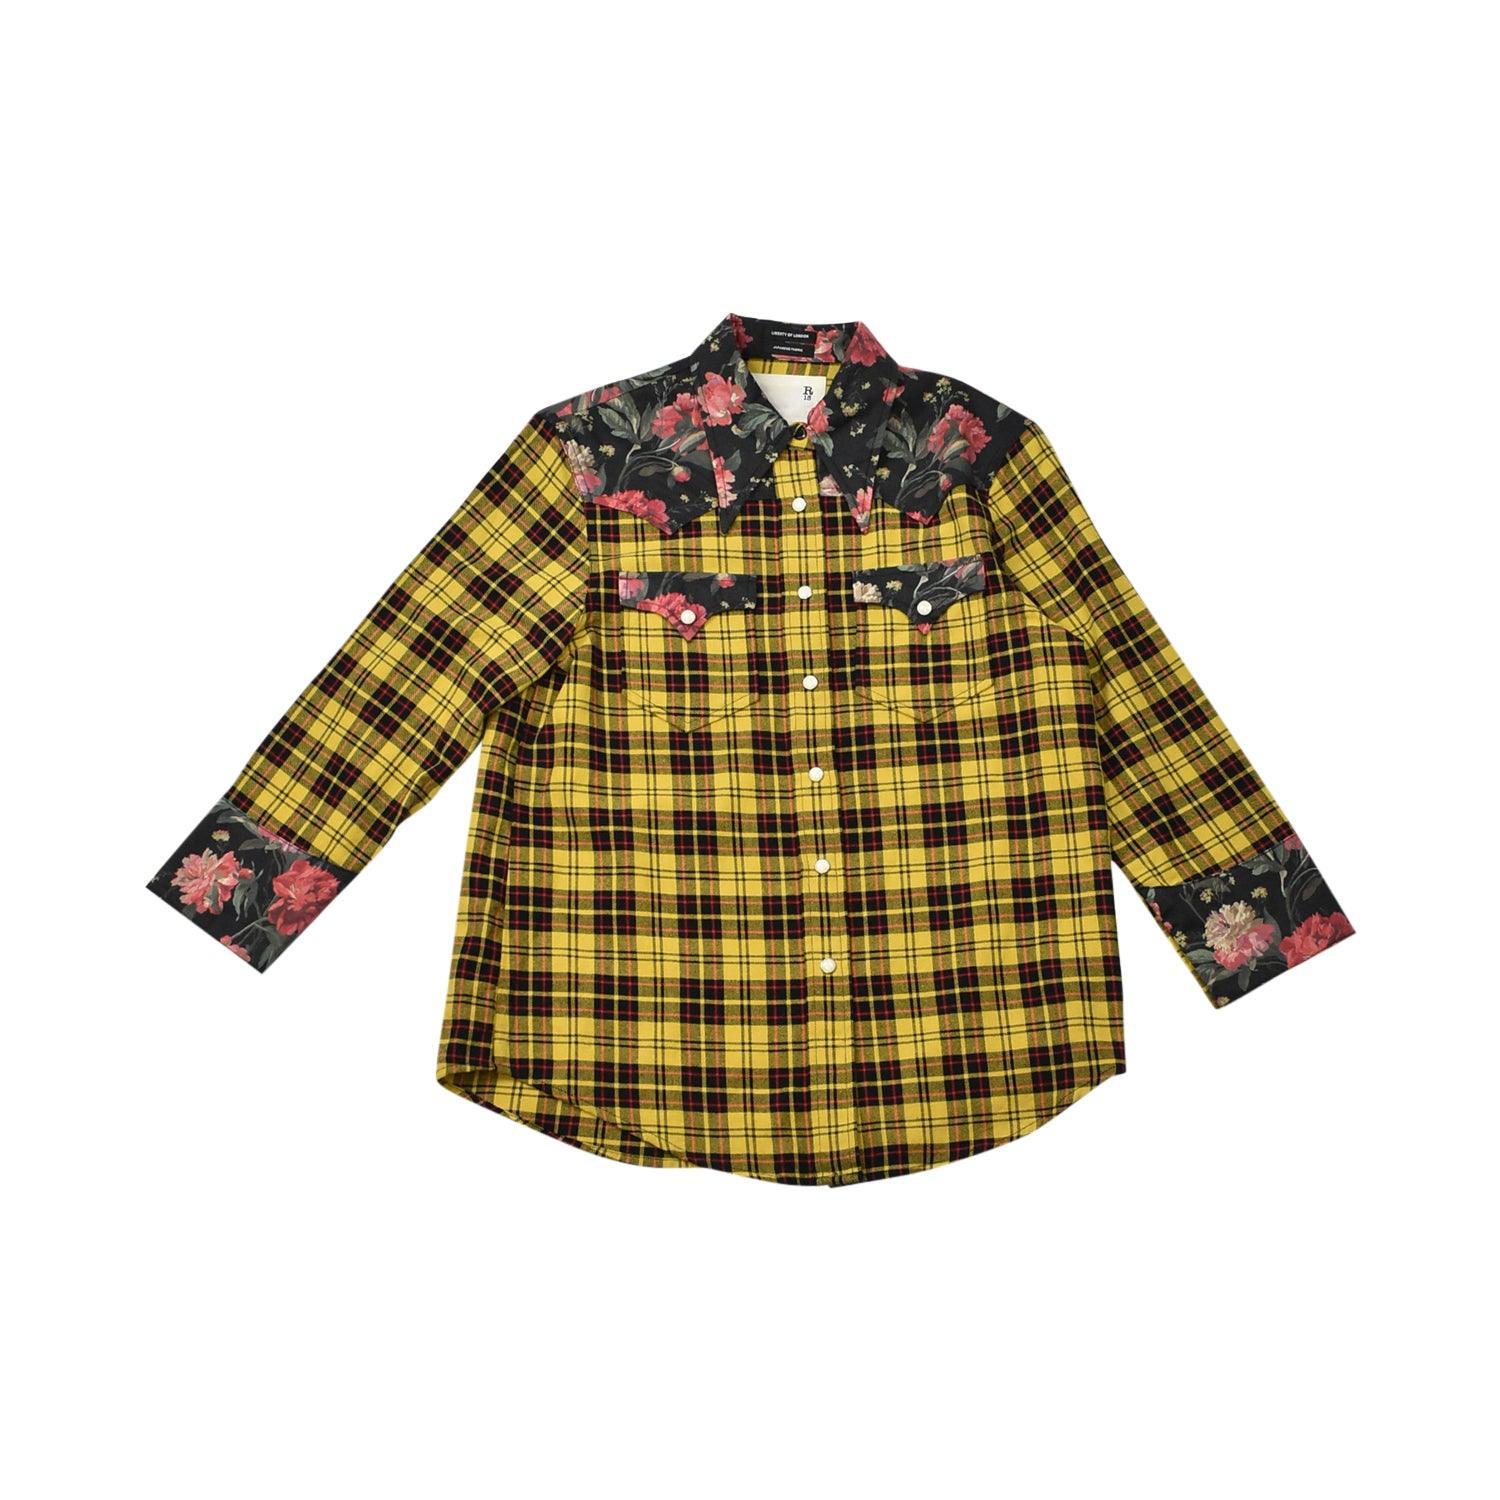 R13 Flannel - Women's S - Fashionably Yours